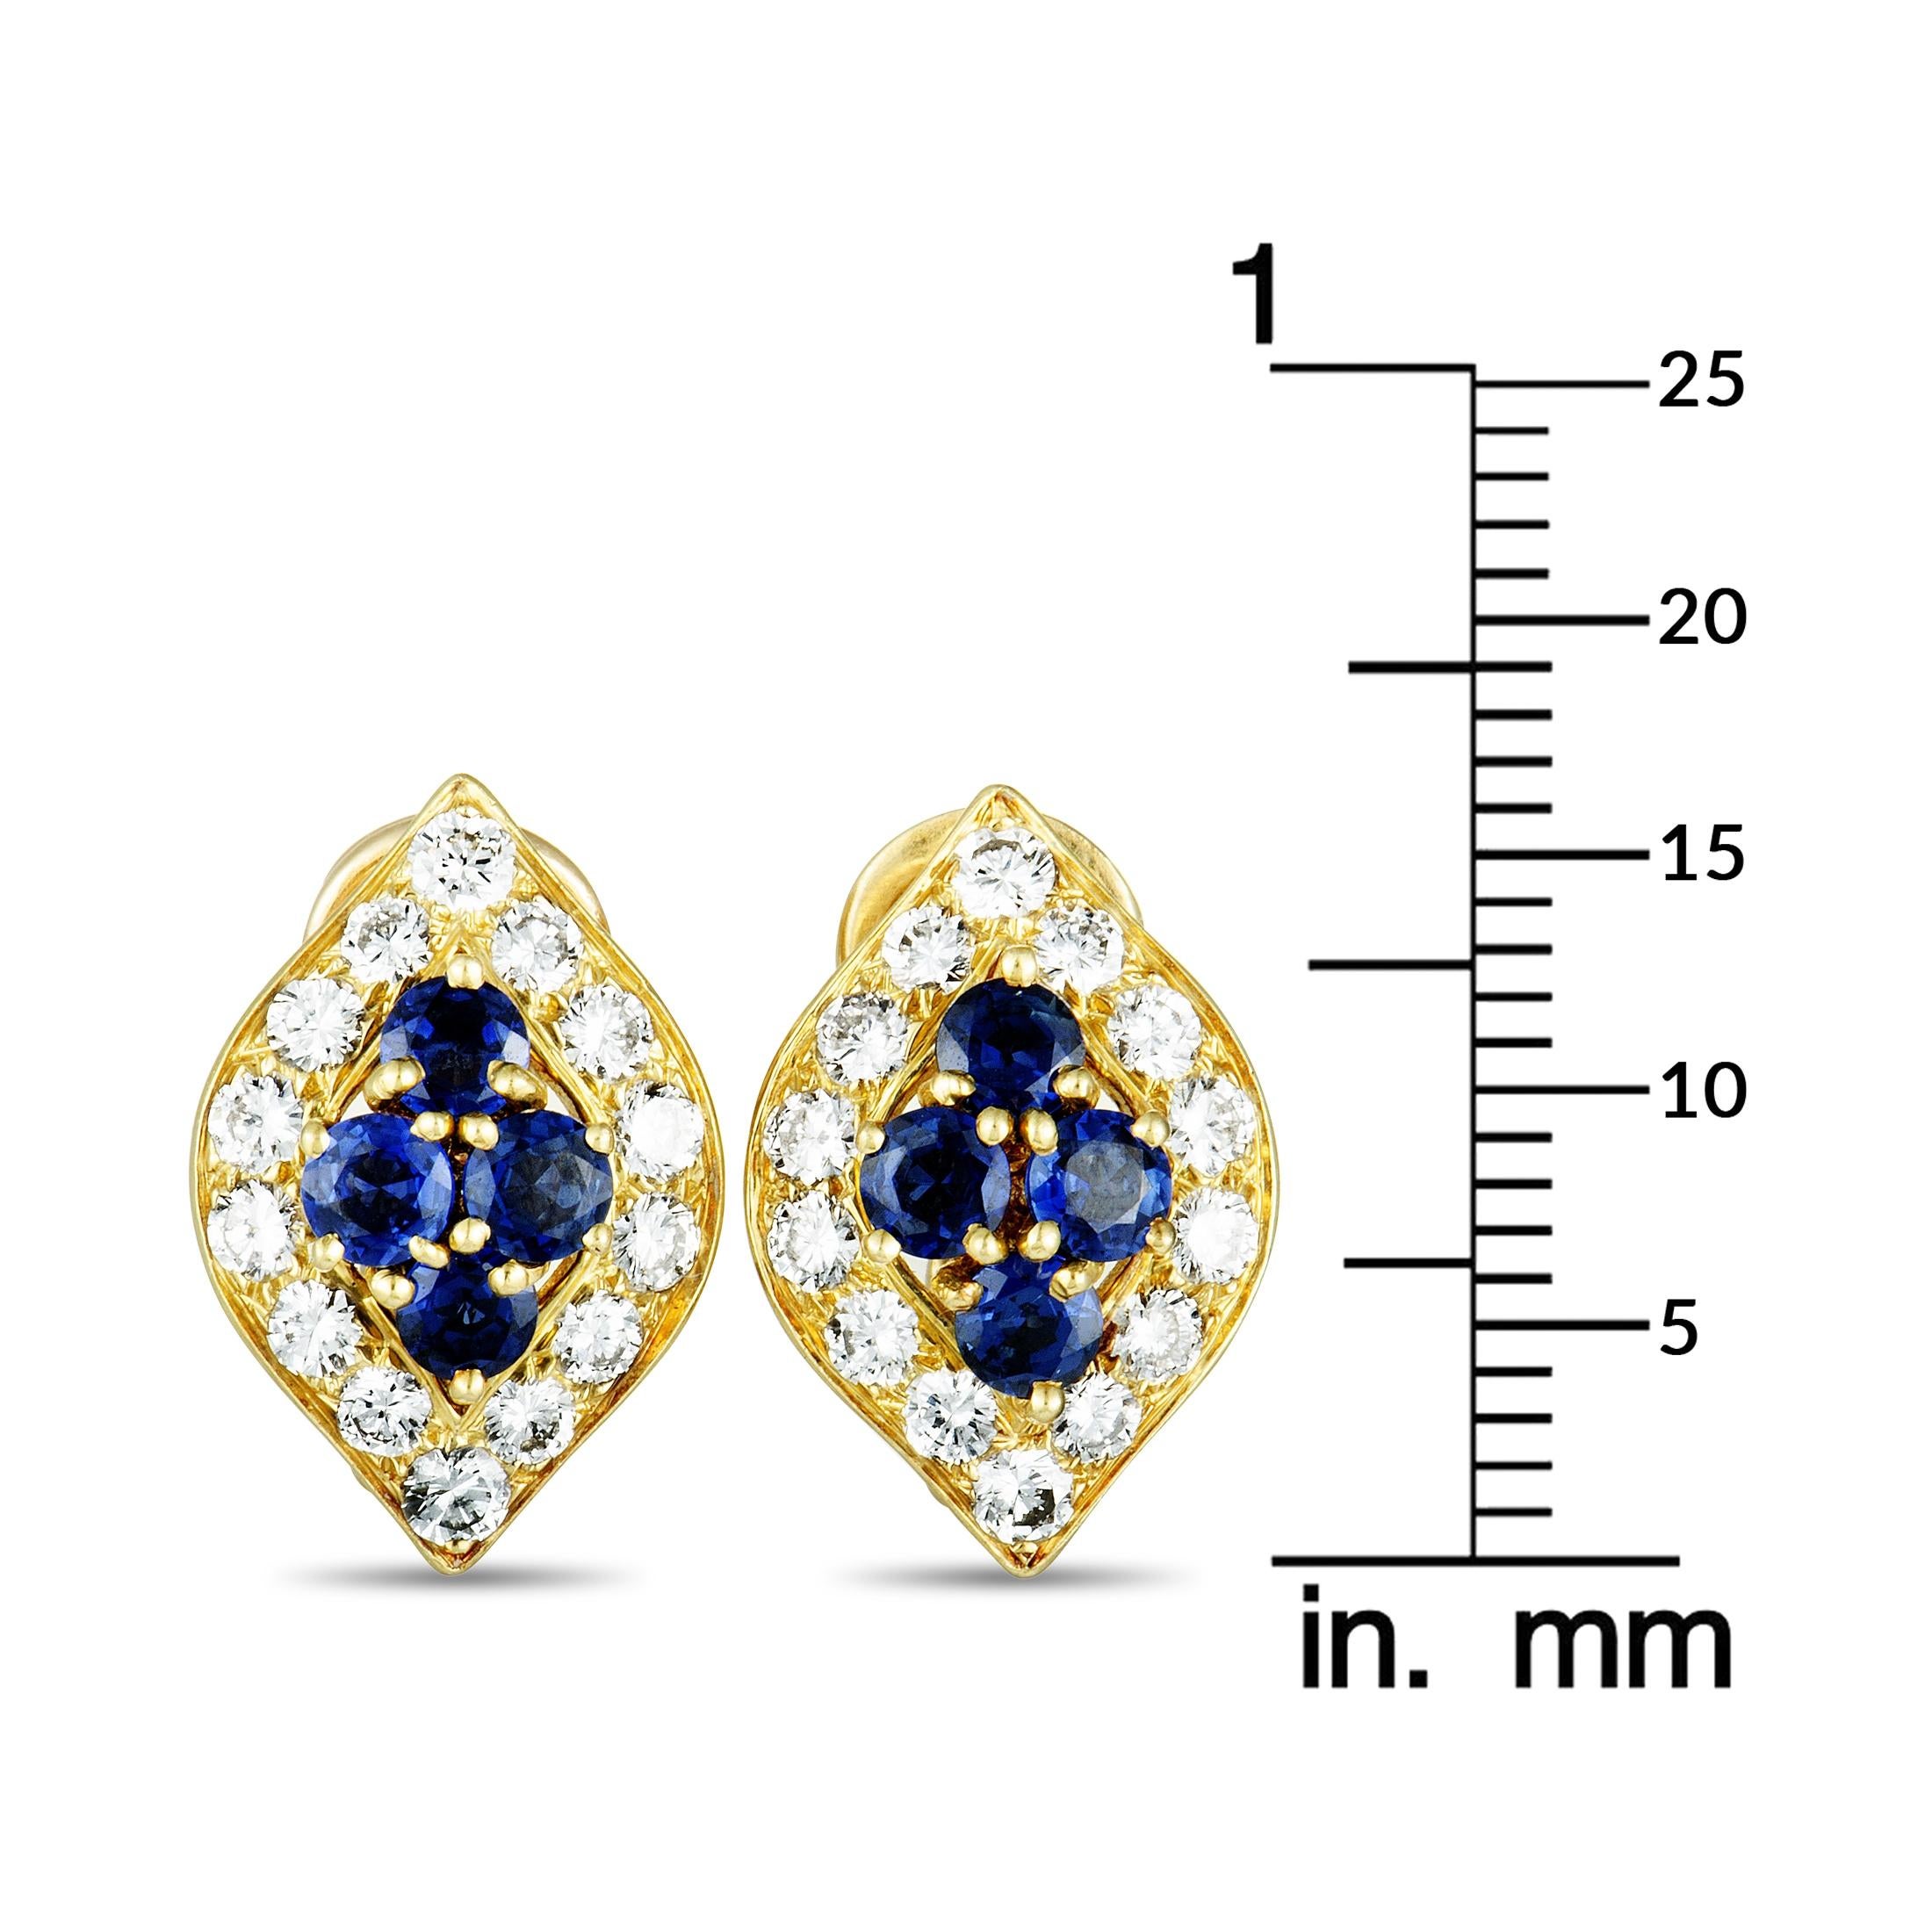 Women's Van Cleef & Arpels Vintage Diamond and Sapphire Yellow Gold Clip-On Earrings